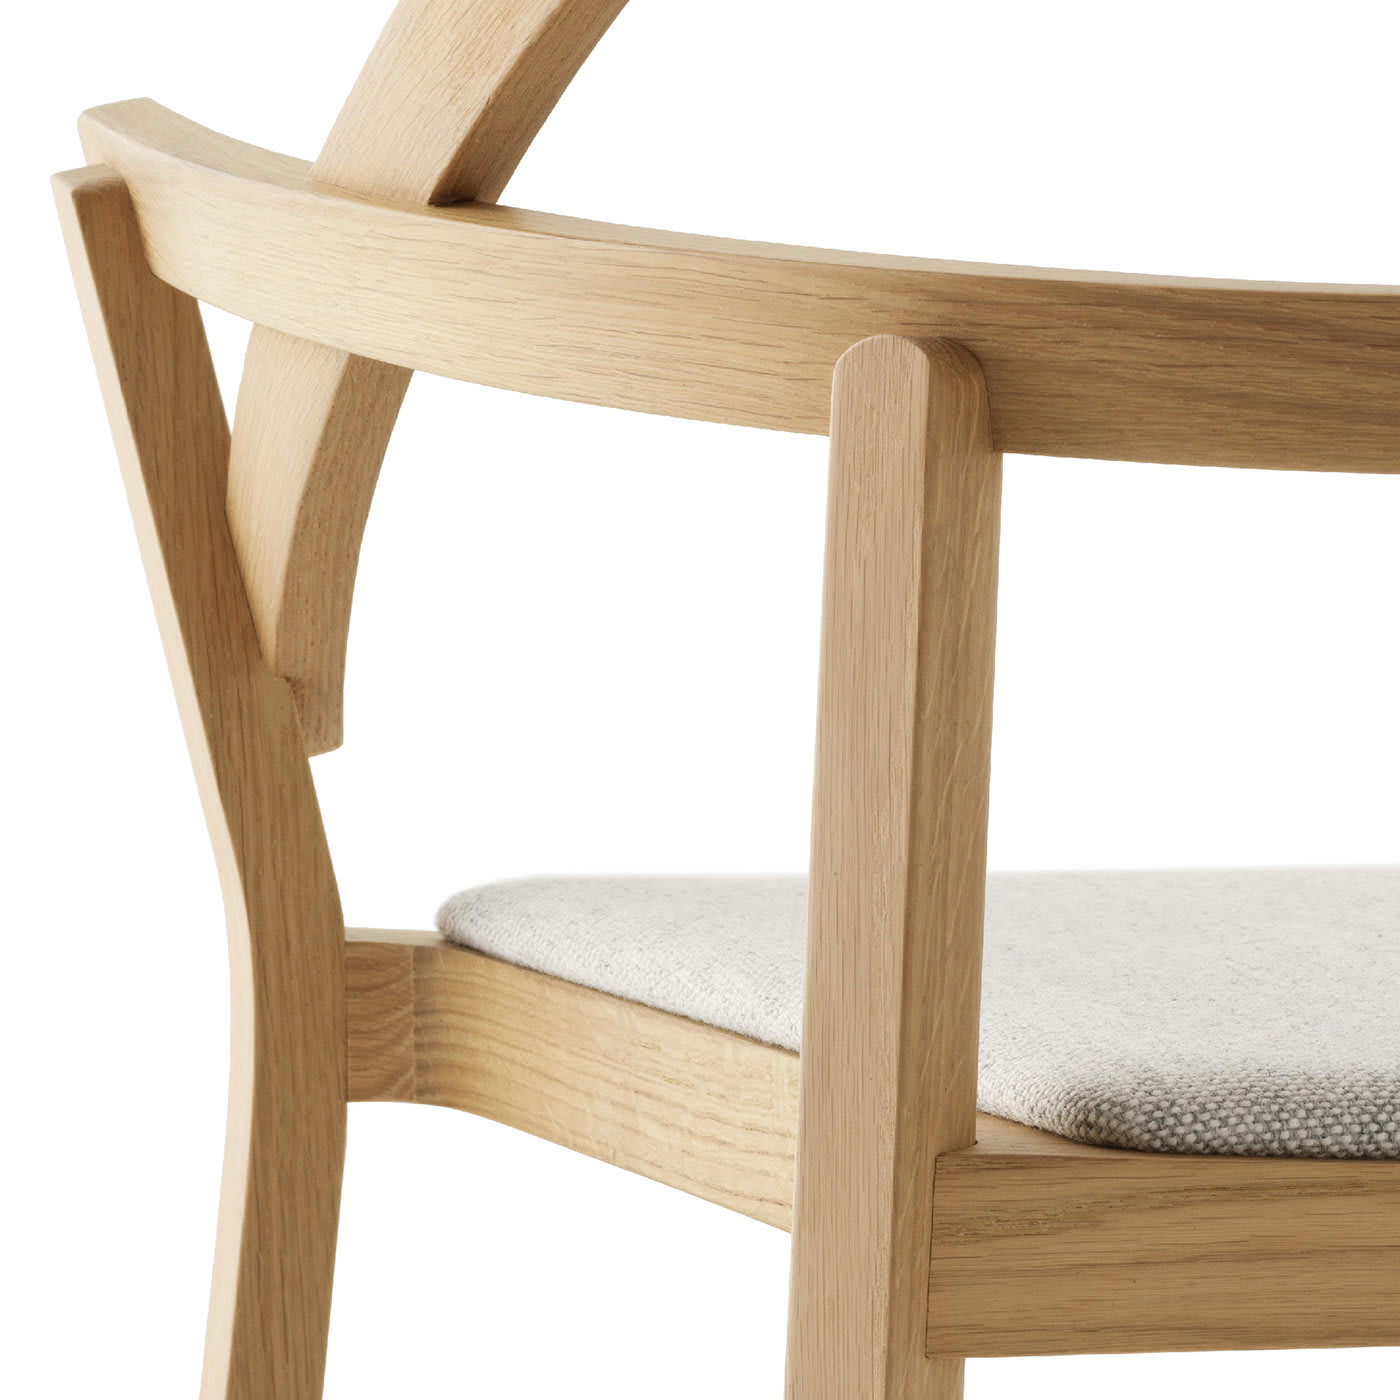 Baci Natural Oak Dining chair with Gray Upholstered Seat - Passoni Design